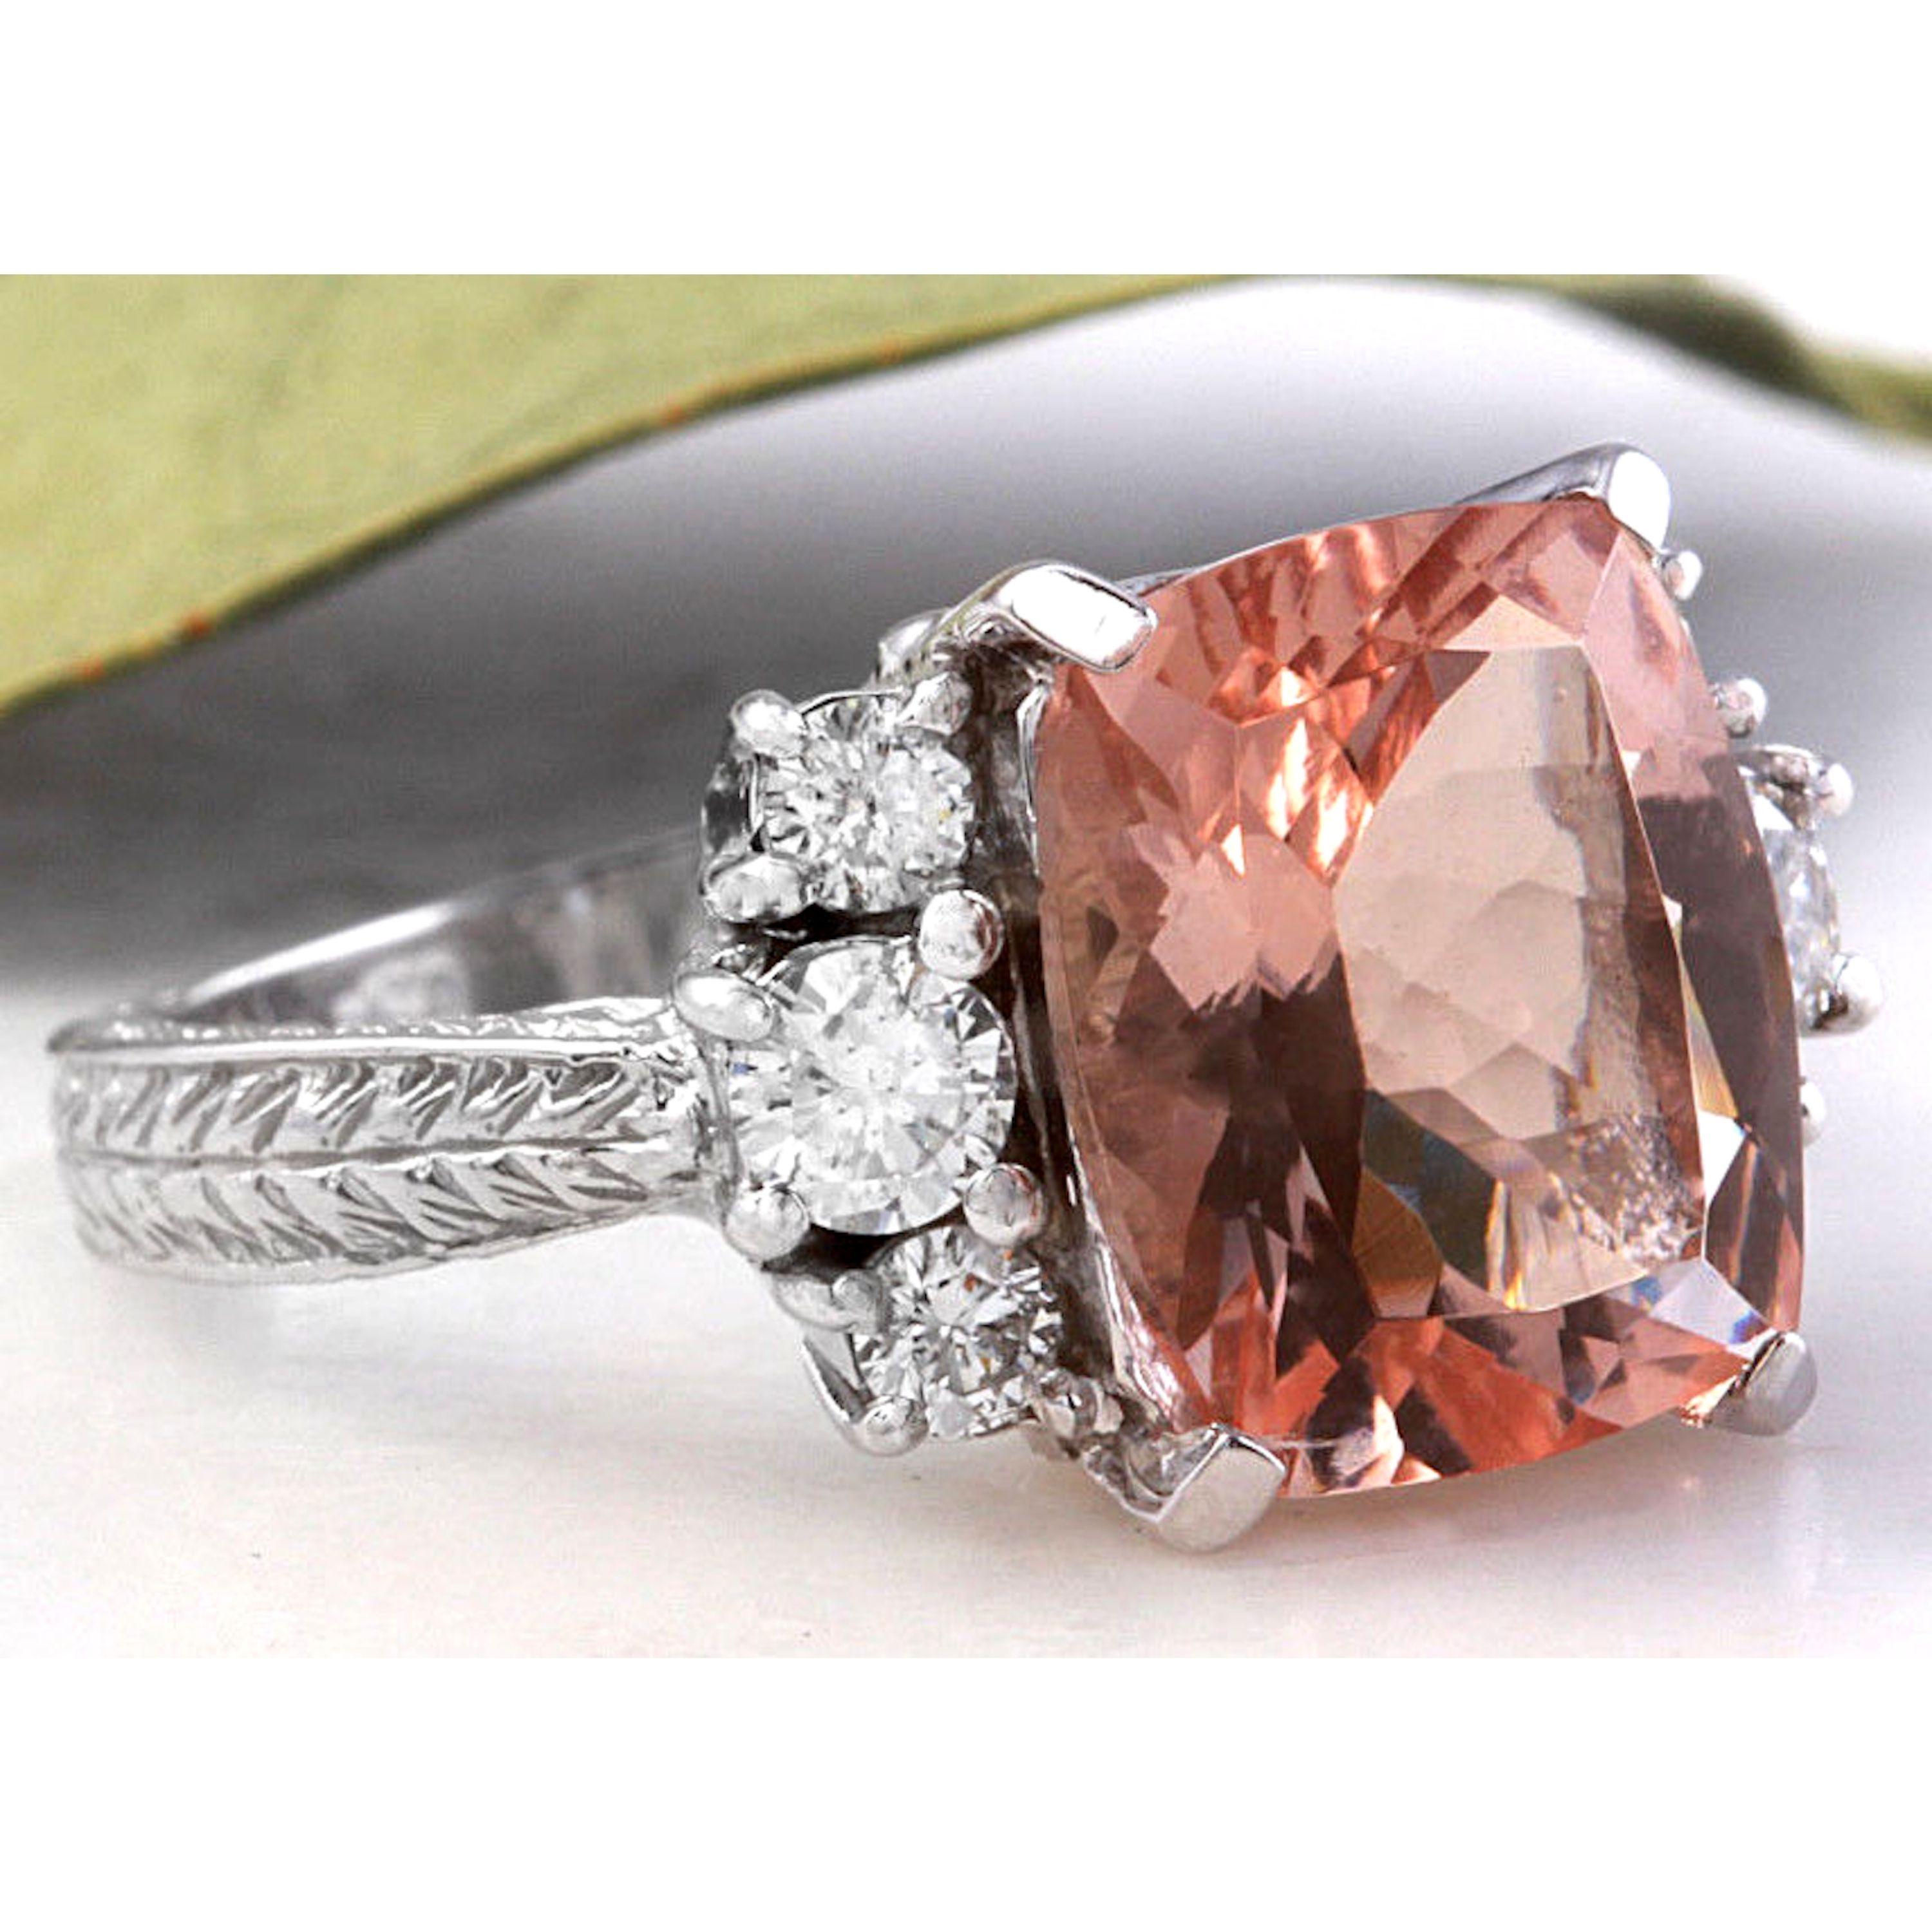 6.65 Carats Exquisite Natural Morganite and Diamond 14K Solid White Gold Ring

Total Natural Cushion Morganite Weights: Approx. 6.00 Carats

Morganite Measures: Approx. 11.00 x 9.00mm

Natural Round Diamonds Weight: Approx. 0.65 Carats (color G-H /